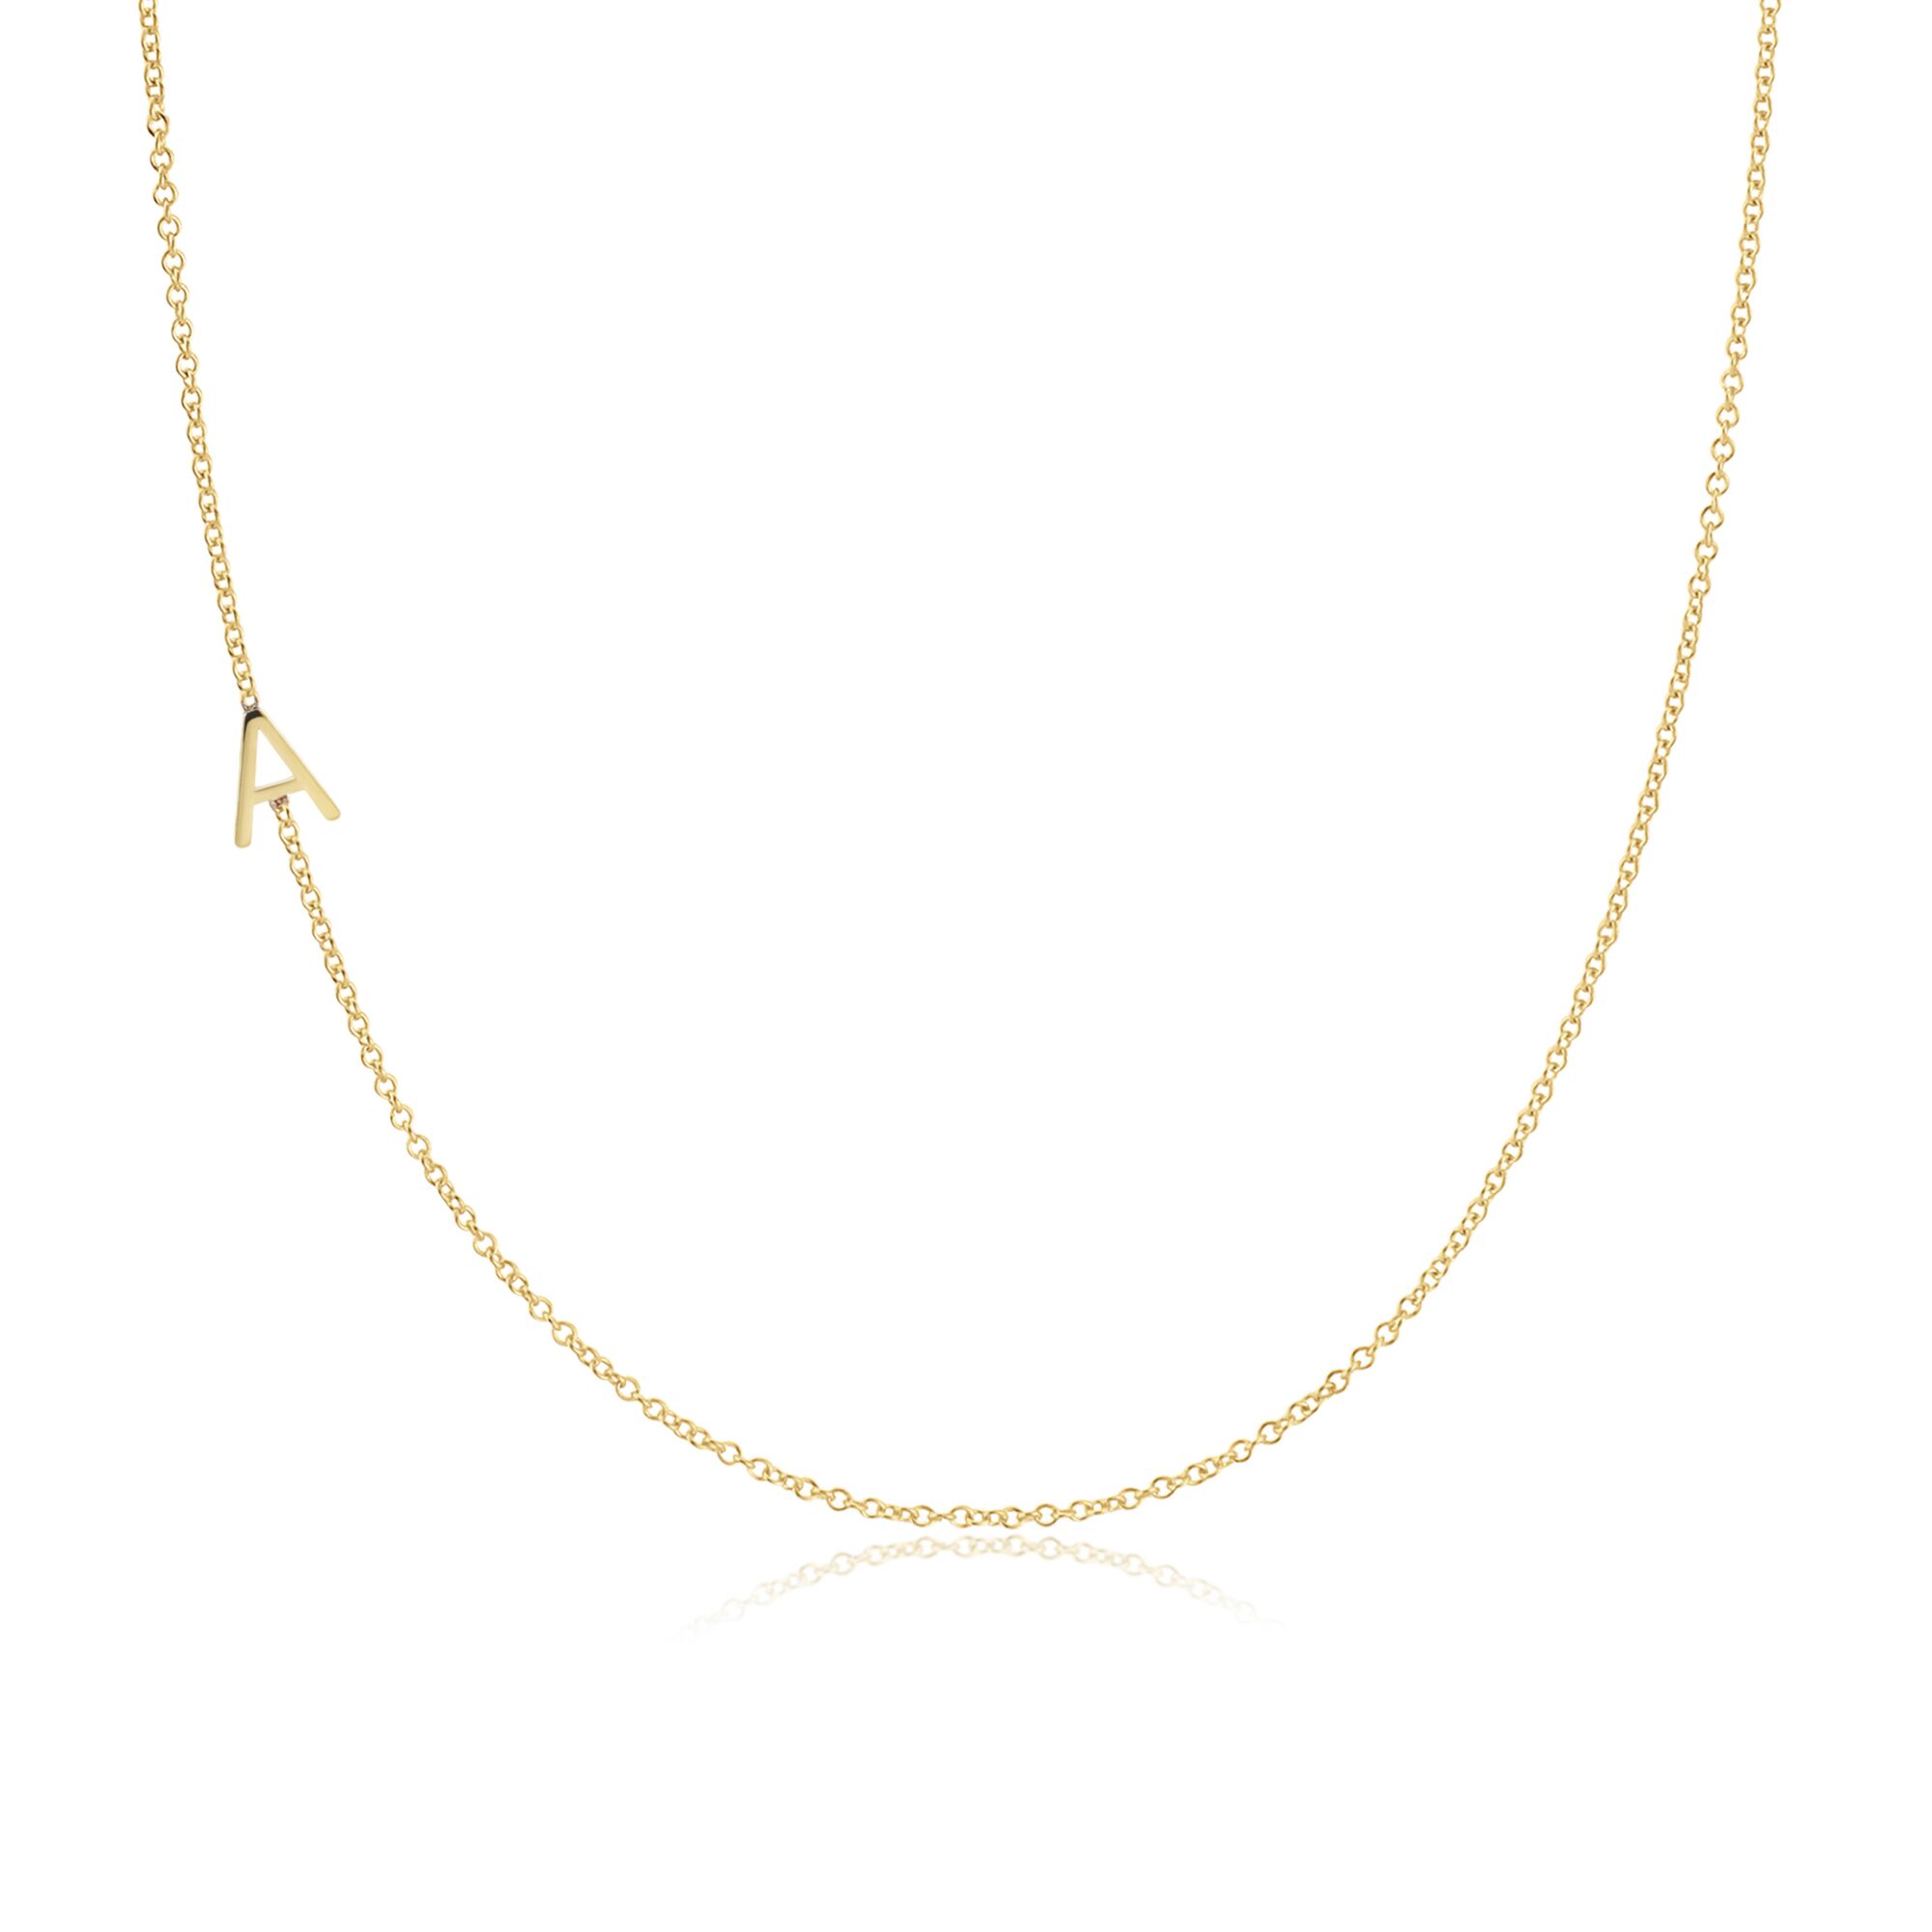 Letter necklace from Maya Brenner